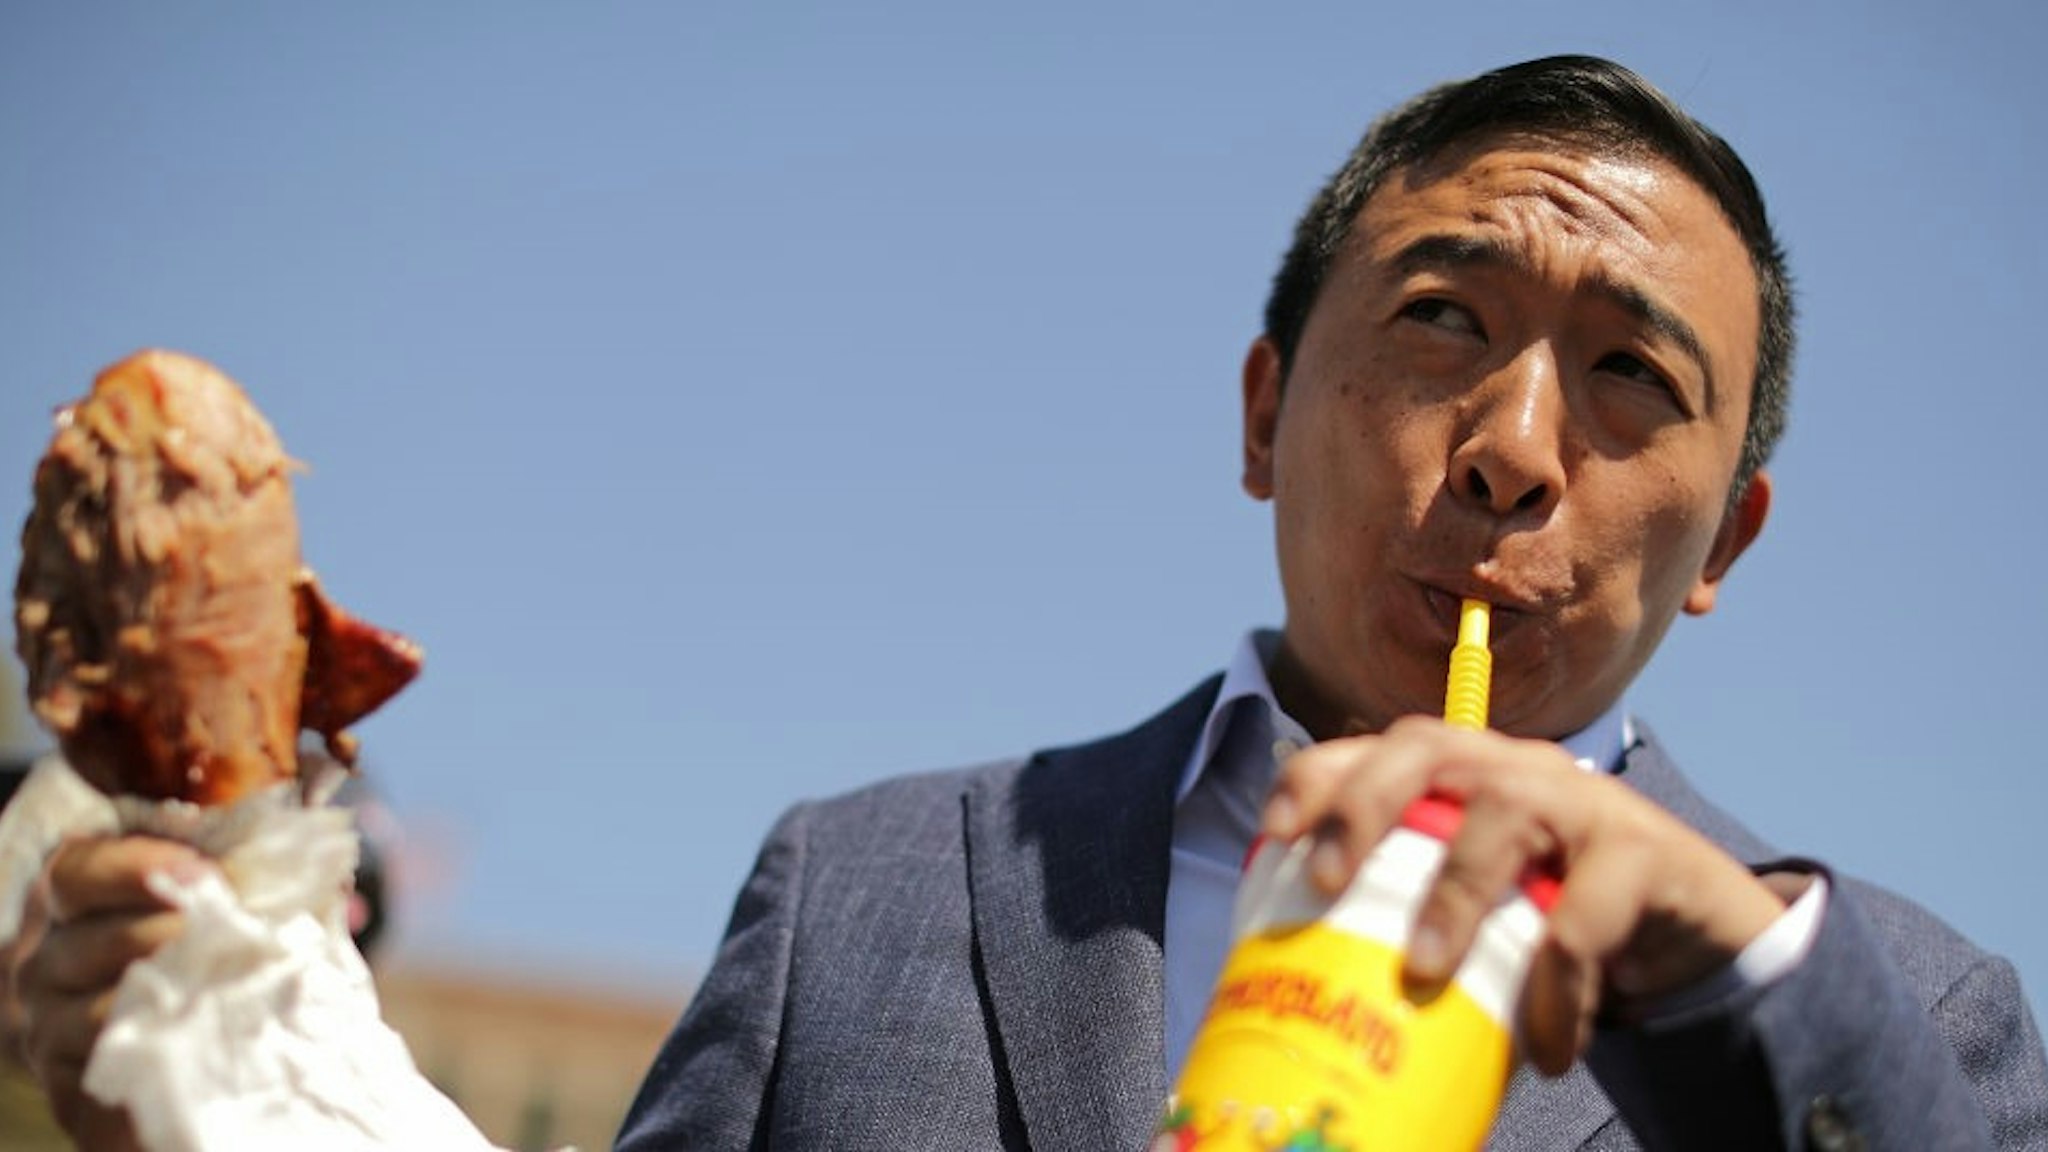 DES MOINES, IOWA - AUGUST 09: Democratic presidential candidate Andrew Yang eats a roasted turkey leg while visiting the Iowa State Fair August 09, 2019 in Des Moines, Iowa. Twenty two of the 23 politicians seeking the Democratic Party presidential nomination will be visiting the fair this week, six months ahead of the all-important Iowa caucuses. (Photo by